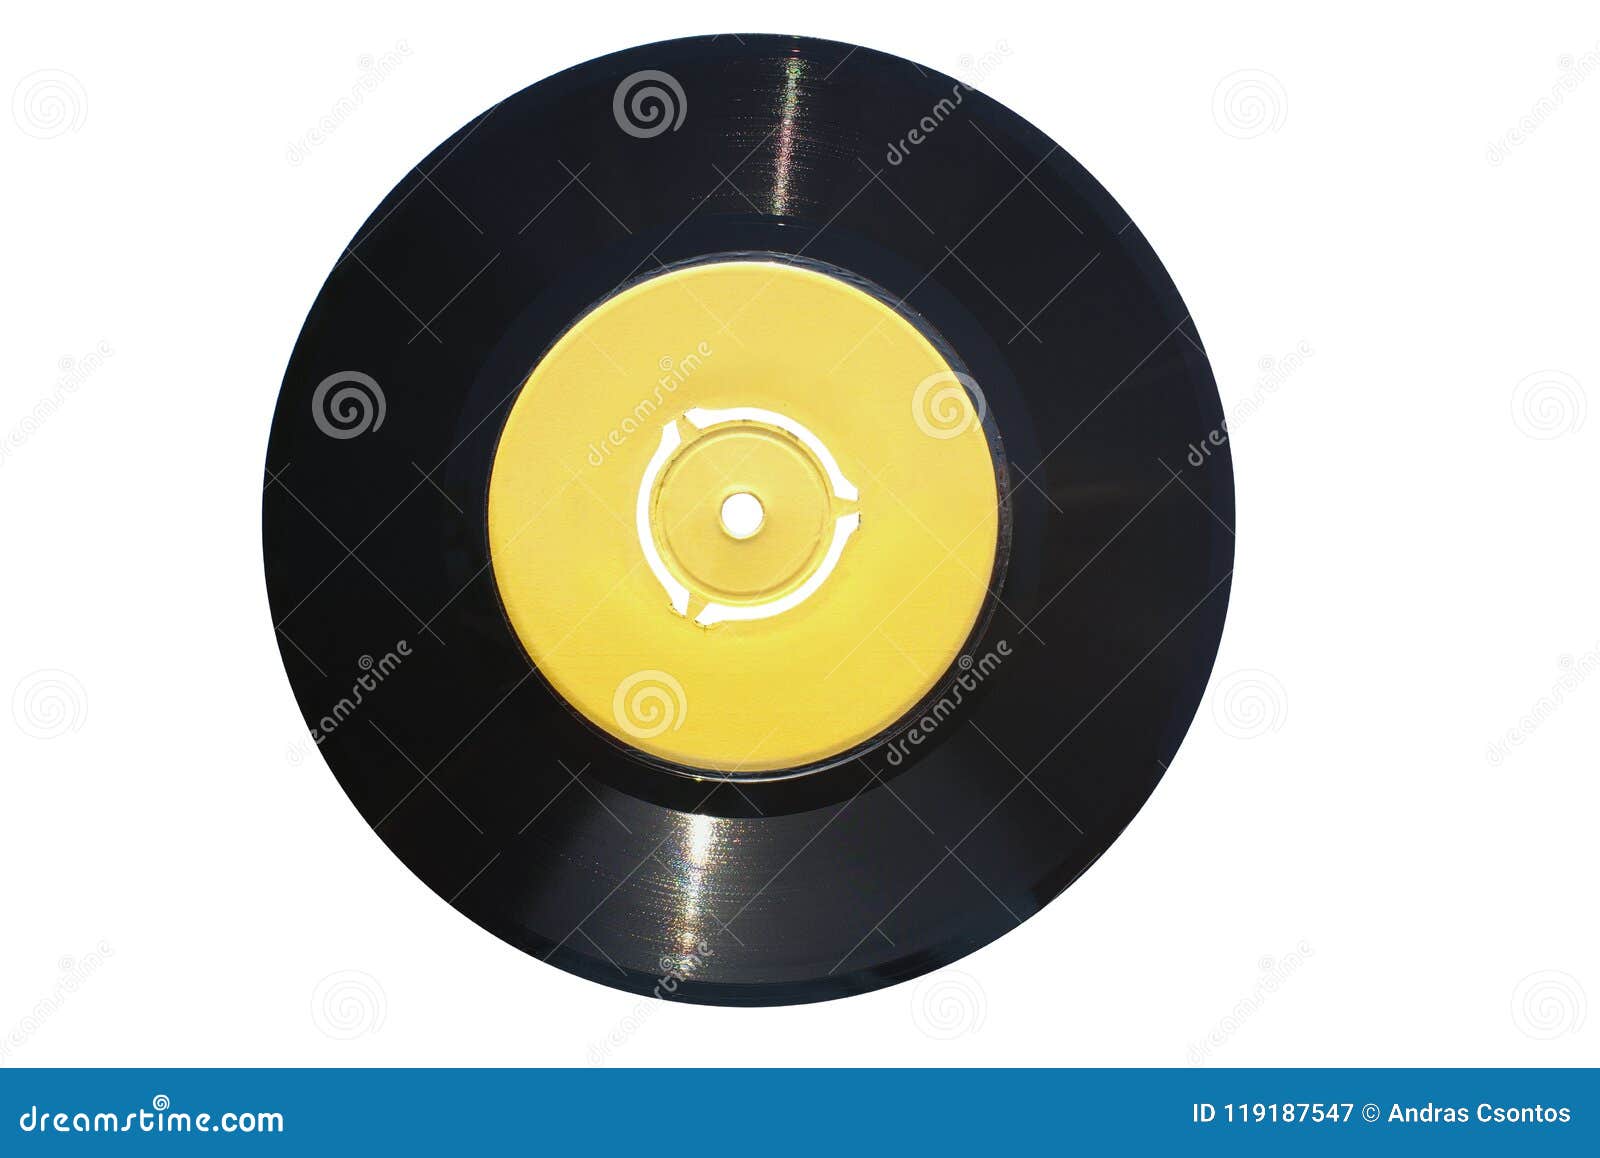 single vinyl record 45 rpm with empty yellow label suitable